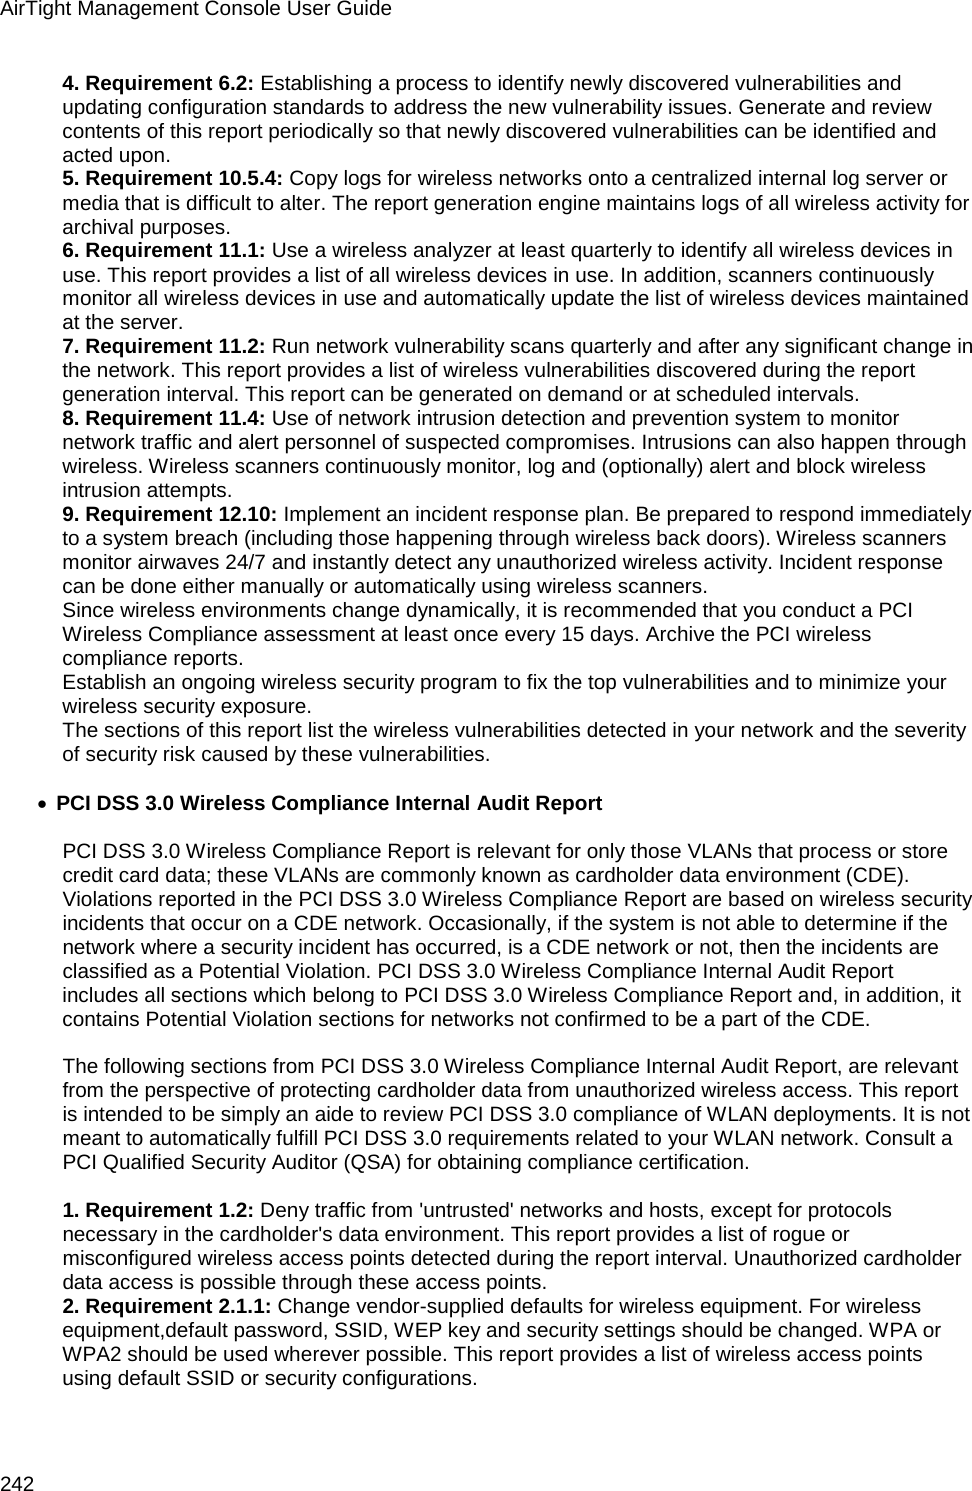 AirTight Management Console User Guide 242 4. Requirement 6.2: Establishing a process to identify newly discovered vulnerabilities and updating configuration standards to address the new vulnerability issues. Generate and review contents of this report periodically so that newly discovered vulnerabilities can be identified and acted upon. 5. Requirement 10.5.4: Copy logs for wireless networks onto a centralized internal log server or media that is difficult to alter. The report generation engine maintains logs of all wireless activity for archival purposes. 6. Requirement 11.1: Use a wireless analyzer at least quarterly to identify all wireless devices in use. This report provides a list of all wireless devices in use. In addition, scanners continuously monitor all wireless devices in use and automatically update the list of wireless devices maintained at the server. 7. Requirement 11.2: Run network vulnerability scans quarterly and after any significant change in the network. This report provides a list of wireless vulnerabilities discovered during the report generation interval. This report can be generated on demand or at scheduled intervals. 8. Requirement 11.4: Use of network intrusion detection and prevention system to monitor network traffic and alert personnel of suspected compromises. Intrusions can also happen through wireless. Wireless scanners continuously monitor, log and (optionally) alert and block wireless intrusion attempts. 9. Requirement 12.10: Implement an incident response plan. Be prepared to respond immediately to a system breach (including those happening through wireless back doors). Wireless scanners monitor airwaves 24/7 and instantly detect any unauthorized wireless activity. Incident response can be done either manually or automatically using wireless scanners. Since wireless environments change dynamically, it is recommended that you conduct a PCI Wireless Compliance assessment at least once every 15 days. Archive the PCI wireless compliance reports. Establish an ongoing wireless security program to fix the top vulnerabilities and to minimize your wireless security exposure. The sections of this report list the wireless vulnerabilities detected in your network and the severity of security risk caused by these vulnerabilities.  • PCI DSS 3.0 Wireless Compliance Internal Audit Report    PCI DSS 3.0 Wireless Compliance Report is relevant for only those VLANs that process or store credit card data; these VLANs are commonly known as cardholder data environment (CDE). Violations reported in the PCI DSS 3.0 Wireless Compliance Report are based on wireless security incidents that occur on a CDE network. Occasionally, if the system is not able to determine if the network where a security incident has occurred, is a CDE network or not, then the incidents are classified as a Potential Violation. PCI DSS 3.0 Wireless Compliance Internal Audit Report includes all sections which belong to PCI DSS 3.0 Wireless Compliance Report and, in addition, it contains Potential Violation sections for networks not confirmed to be a part of the CDE.   The following sections from PCI DSS 3.0 Wireless Compliance Internal Audit Report, are relevant from the perspective of protecting cardholder data from unauthorized wireless access. This report is intended to be simply an aide to review PCI DSS 3.0 compliance of WLAN deployments. It is not meant to automatically fulfill PCI DSS 3.0 requirements related to your WLAN network. Consult a PCI Qualified Security Auditor (QSA) for obtaining compliance certification.   1. Requirement 1.2: Deny traffic from &apos;untrusted&apos; networks and hosts, except for protocols necessary in the cardholder&apos;s data environment. This report provides a list of rogue or misconfigured wireless access points detected during the report interval. Unauthorized cardholder data access is possible through these access points. 2. Requirement 2.1.1: Change vendor-supplied defaults for wireless equipment. For wireless equipment,default password, SSID, WEP key and security settings should be changed. WPA or WPA2 should be used wherever possible. This report provides a list of wireless access points using default SSID or security configurations. 